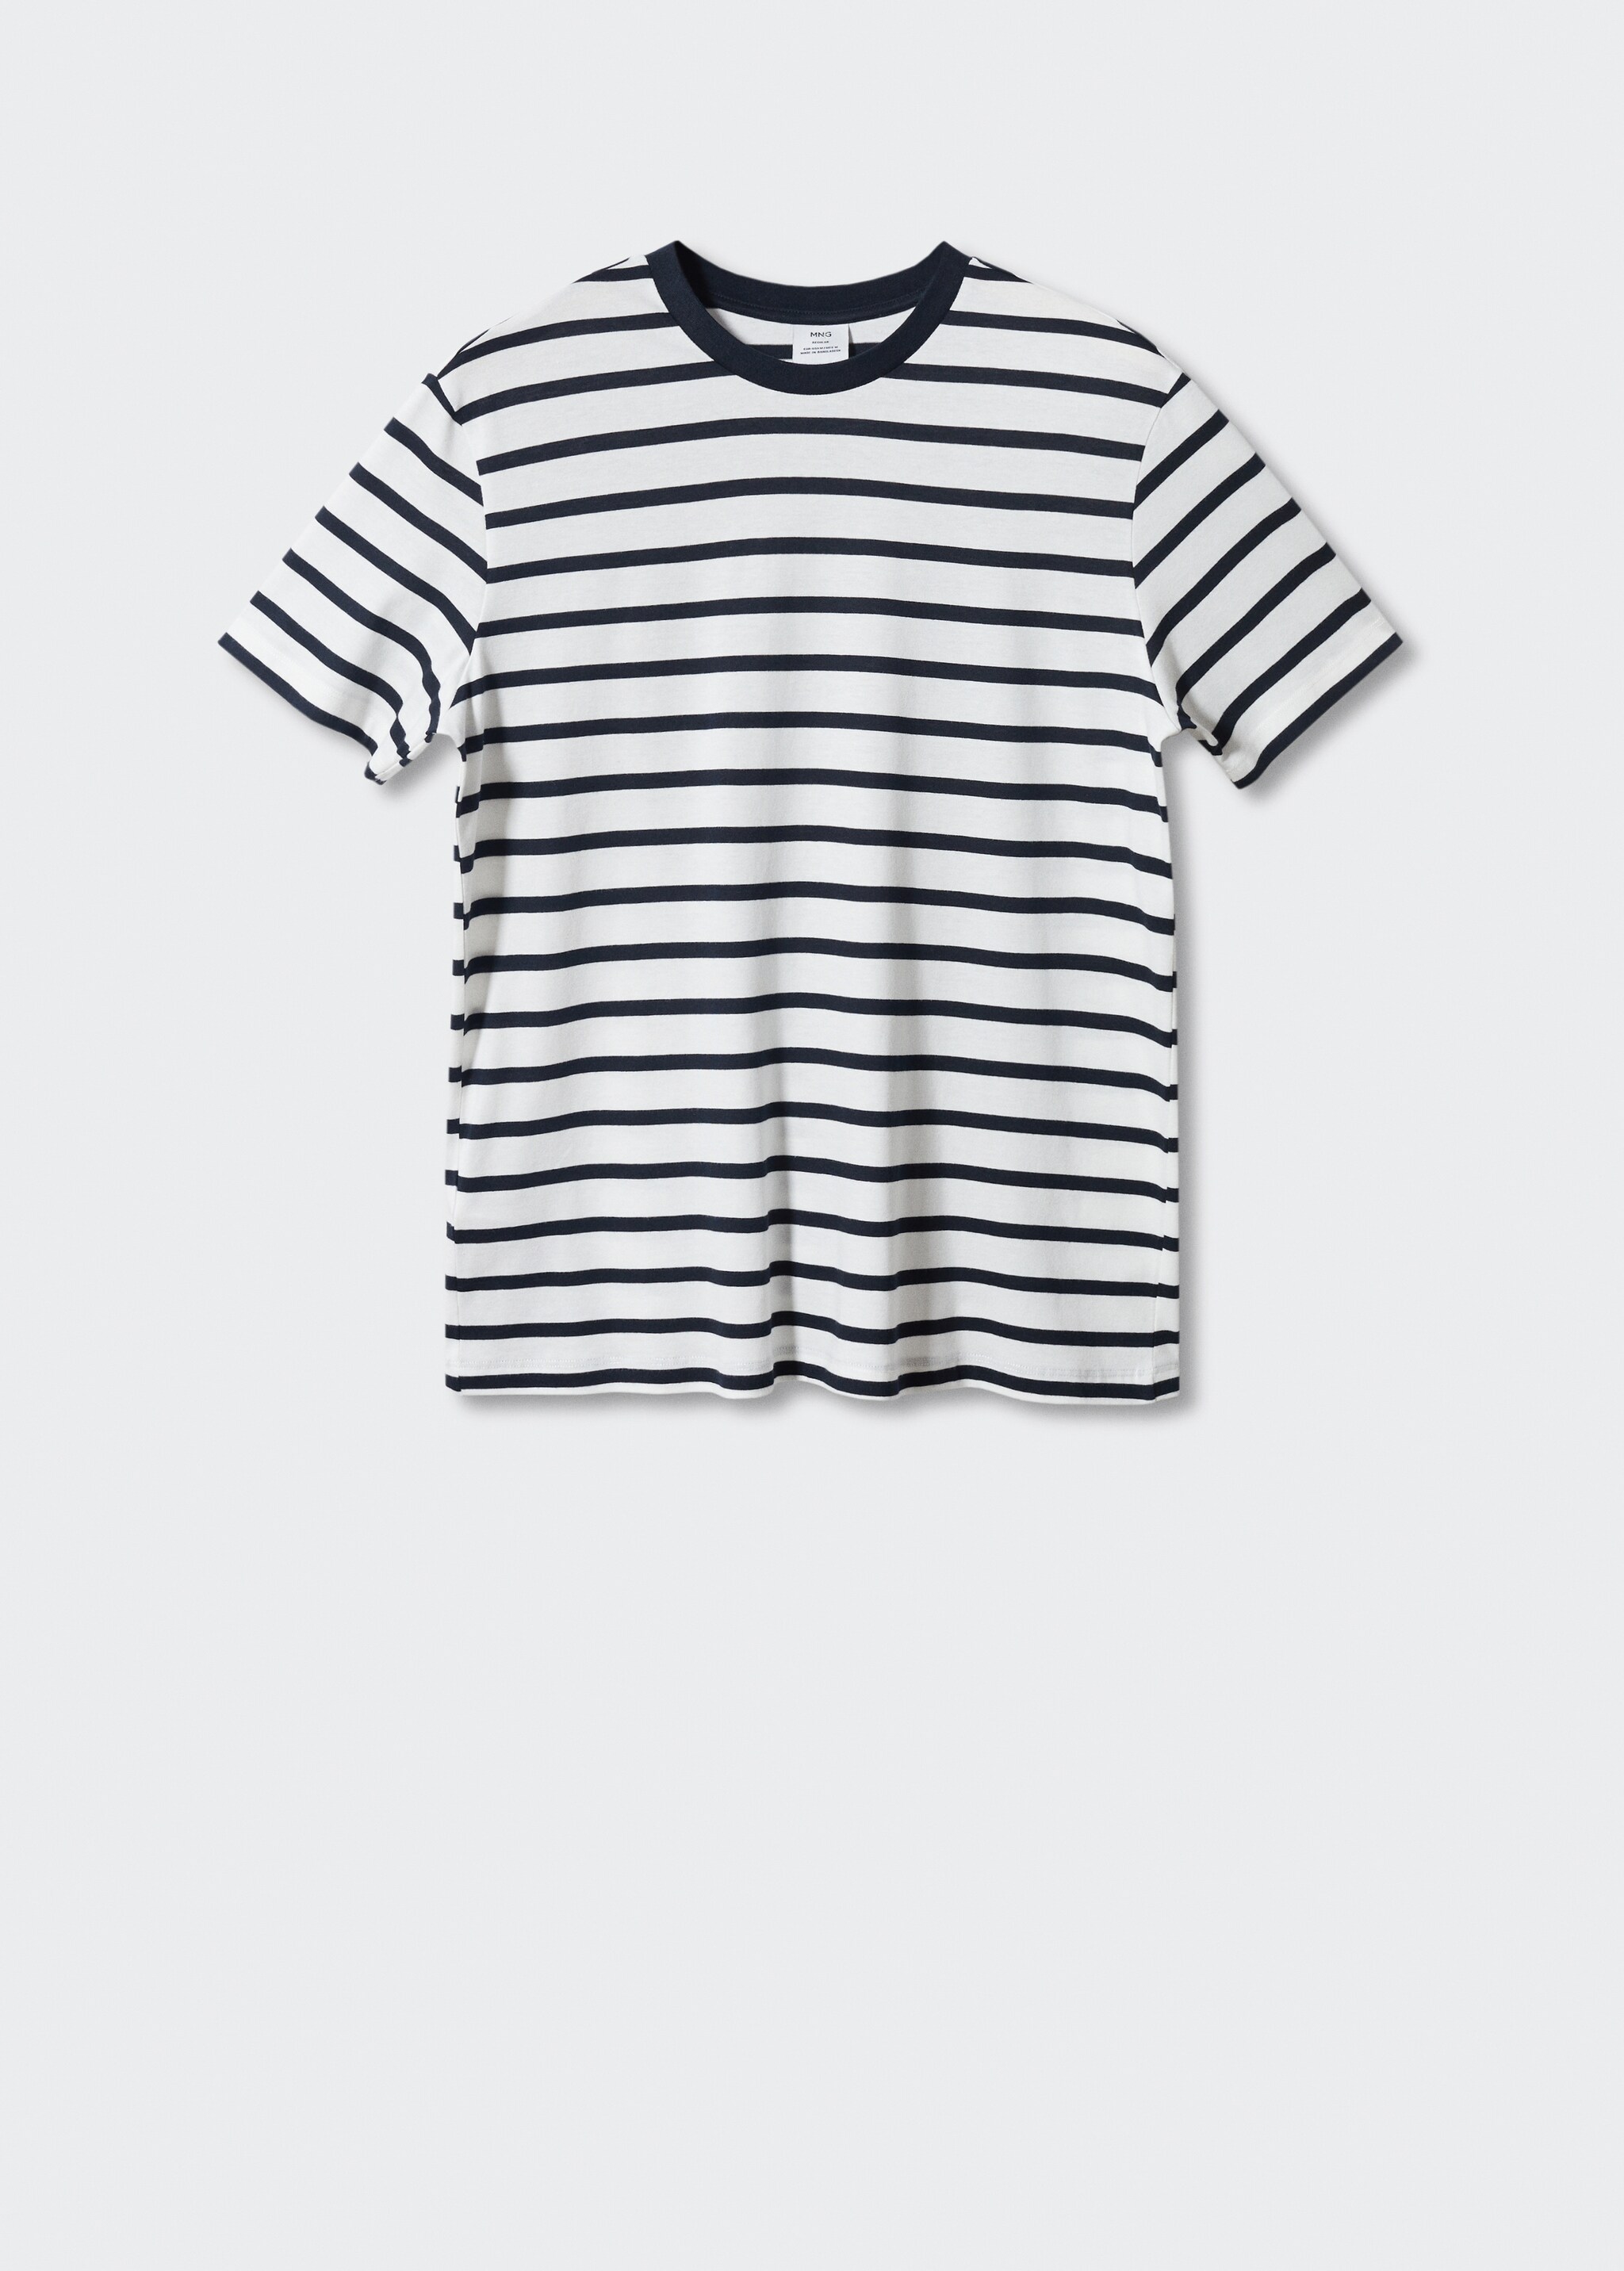 Striped modal cotton knitted t-shirt - Article without model